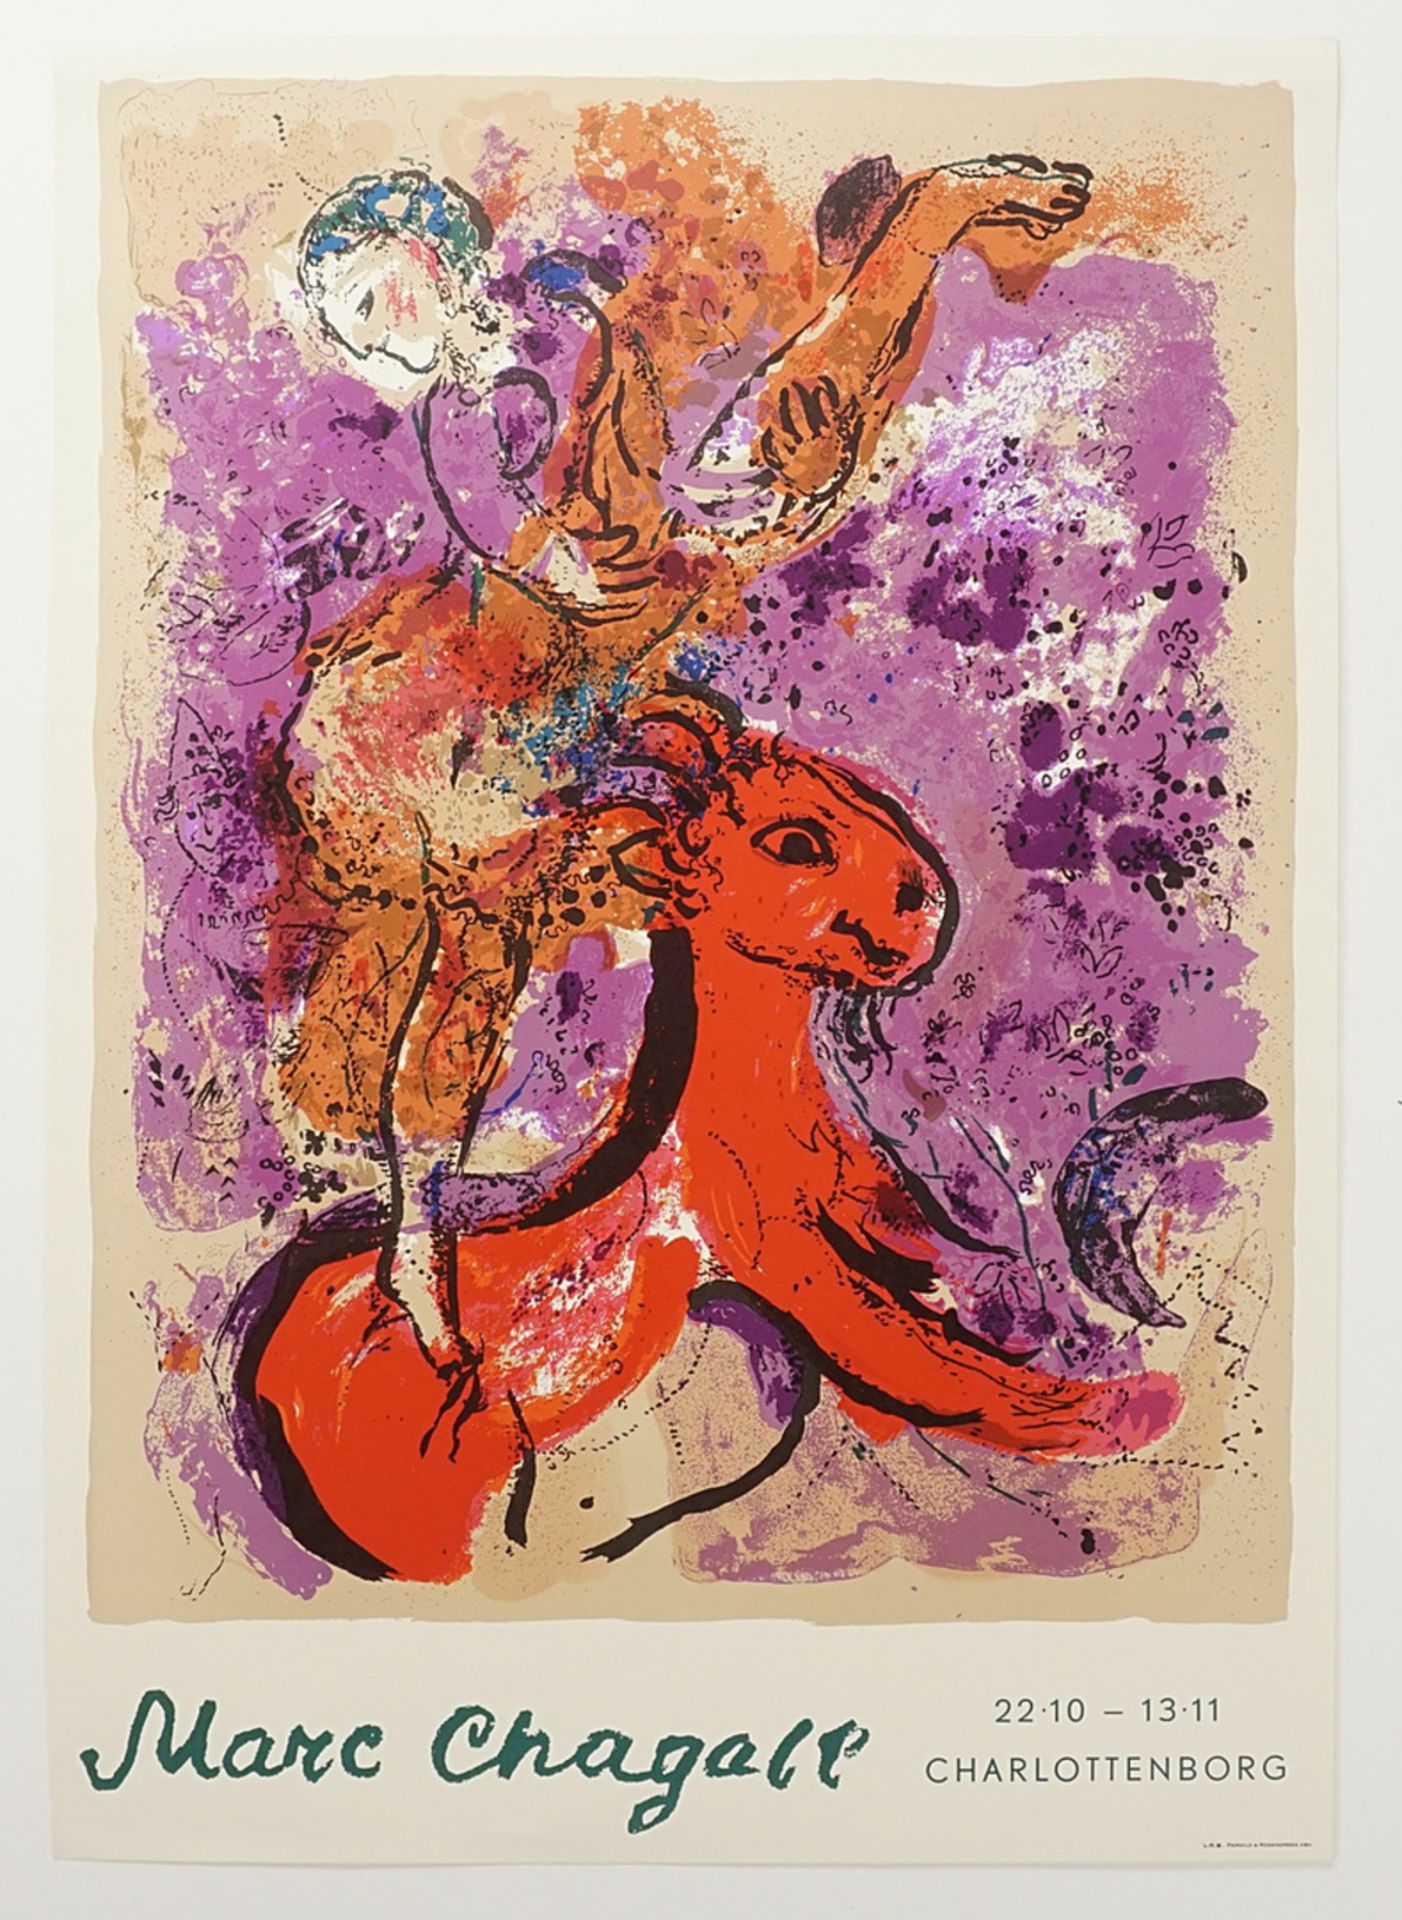 Marc Chagall (1887-1985), Poster for the exhibition at Charlottenborg, Copenhagen, 1960 - Image 3 of 3